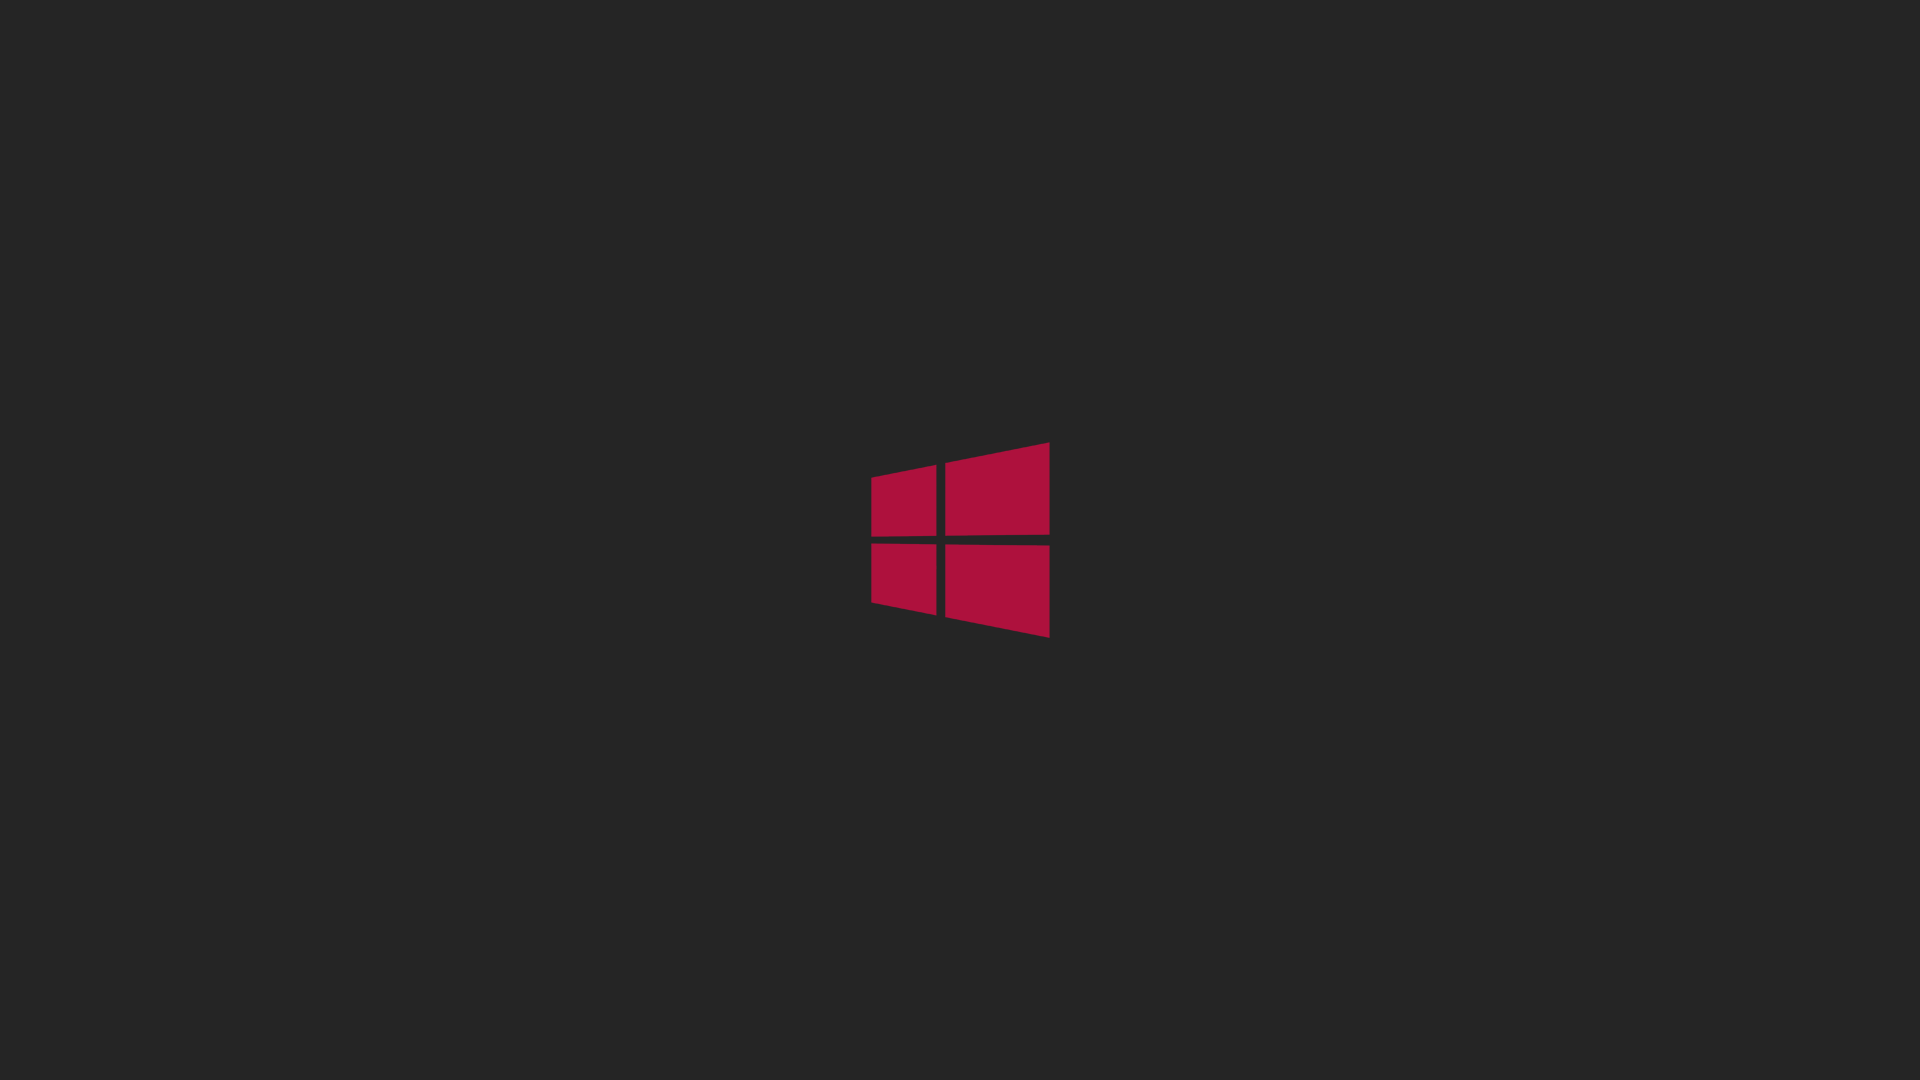 Black Windows Red Logo - Windows 8 Logo with Red Logo and Black Background | HD Wallpapers